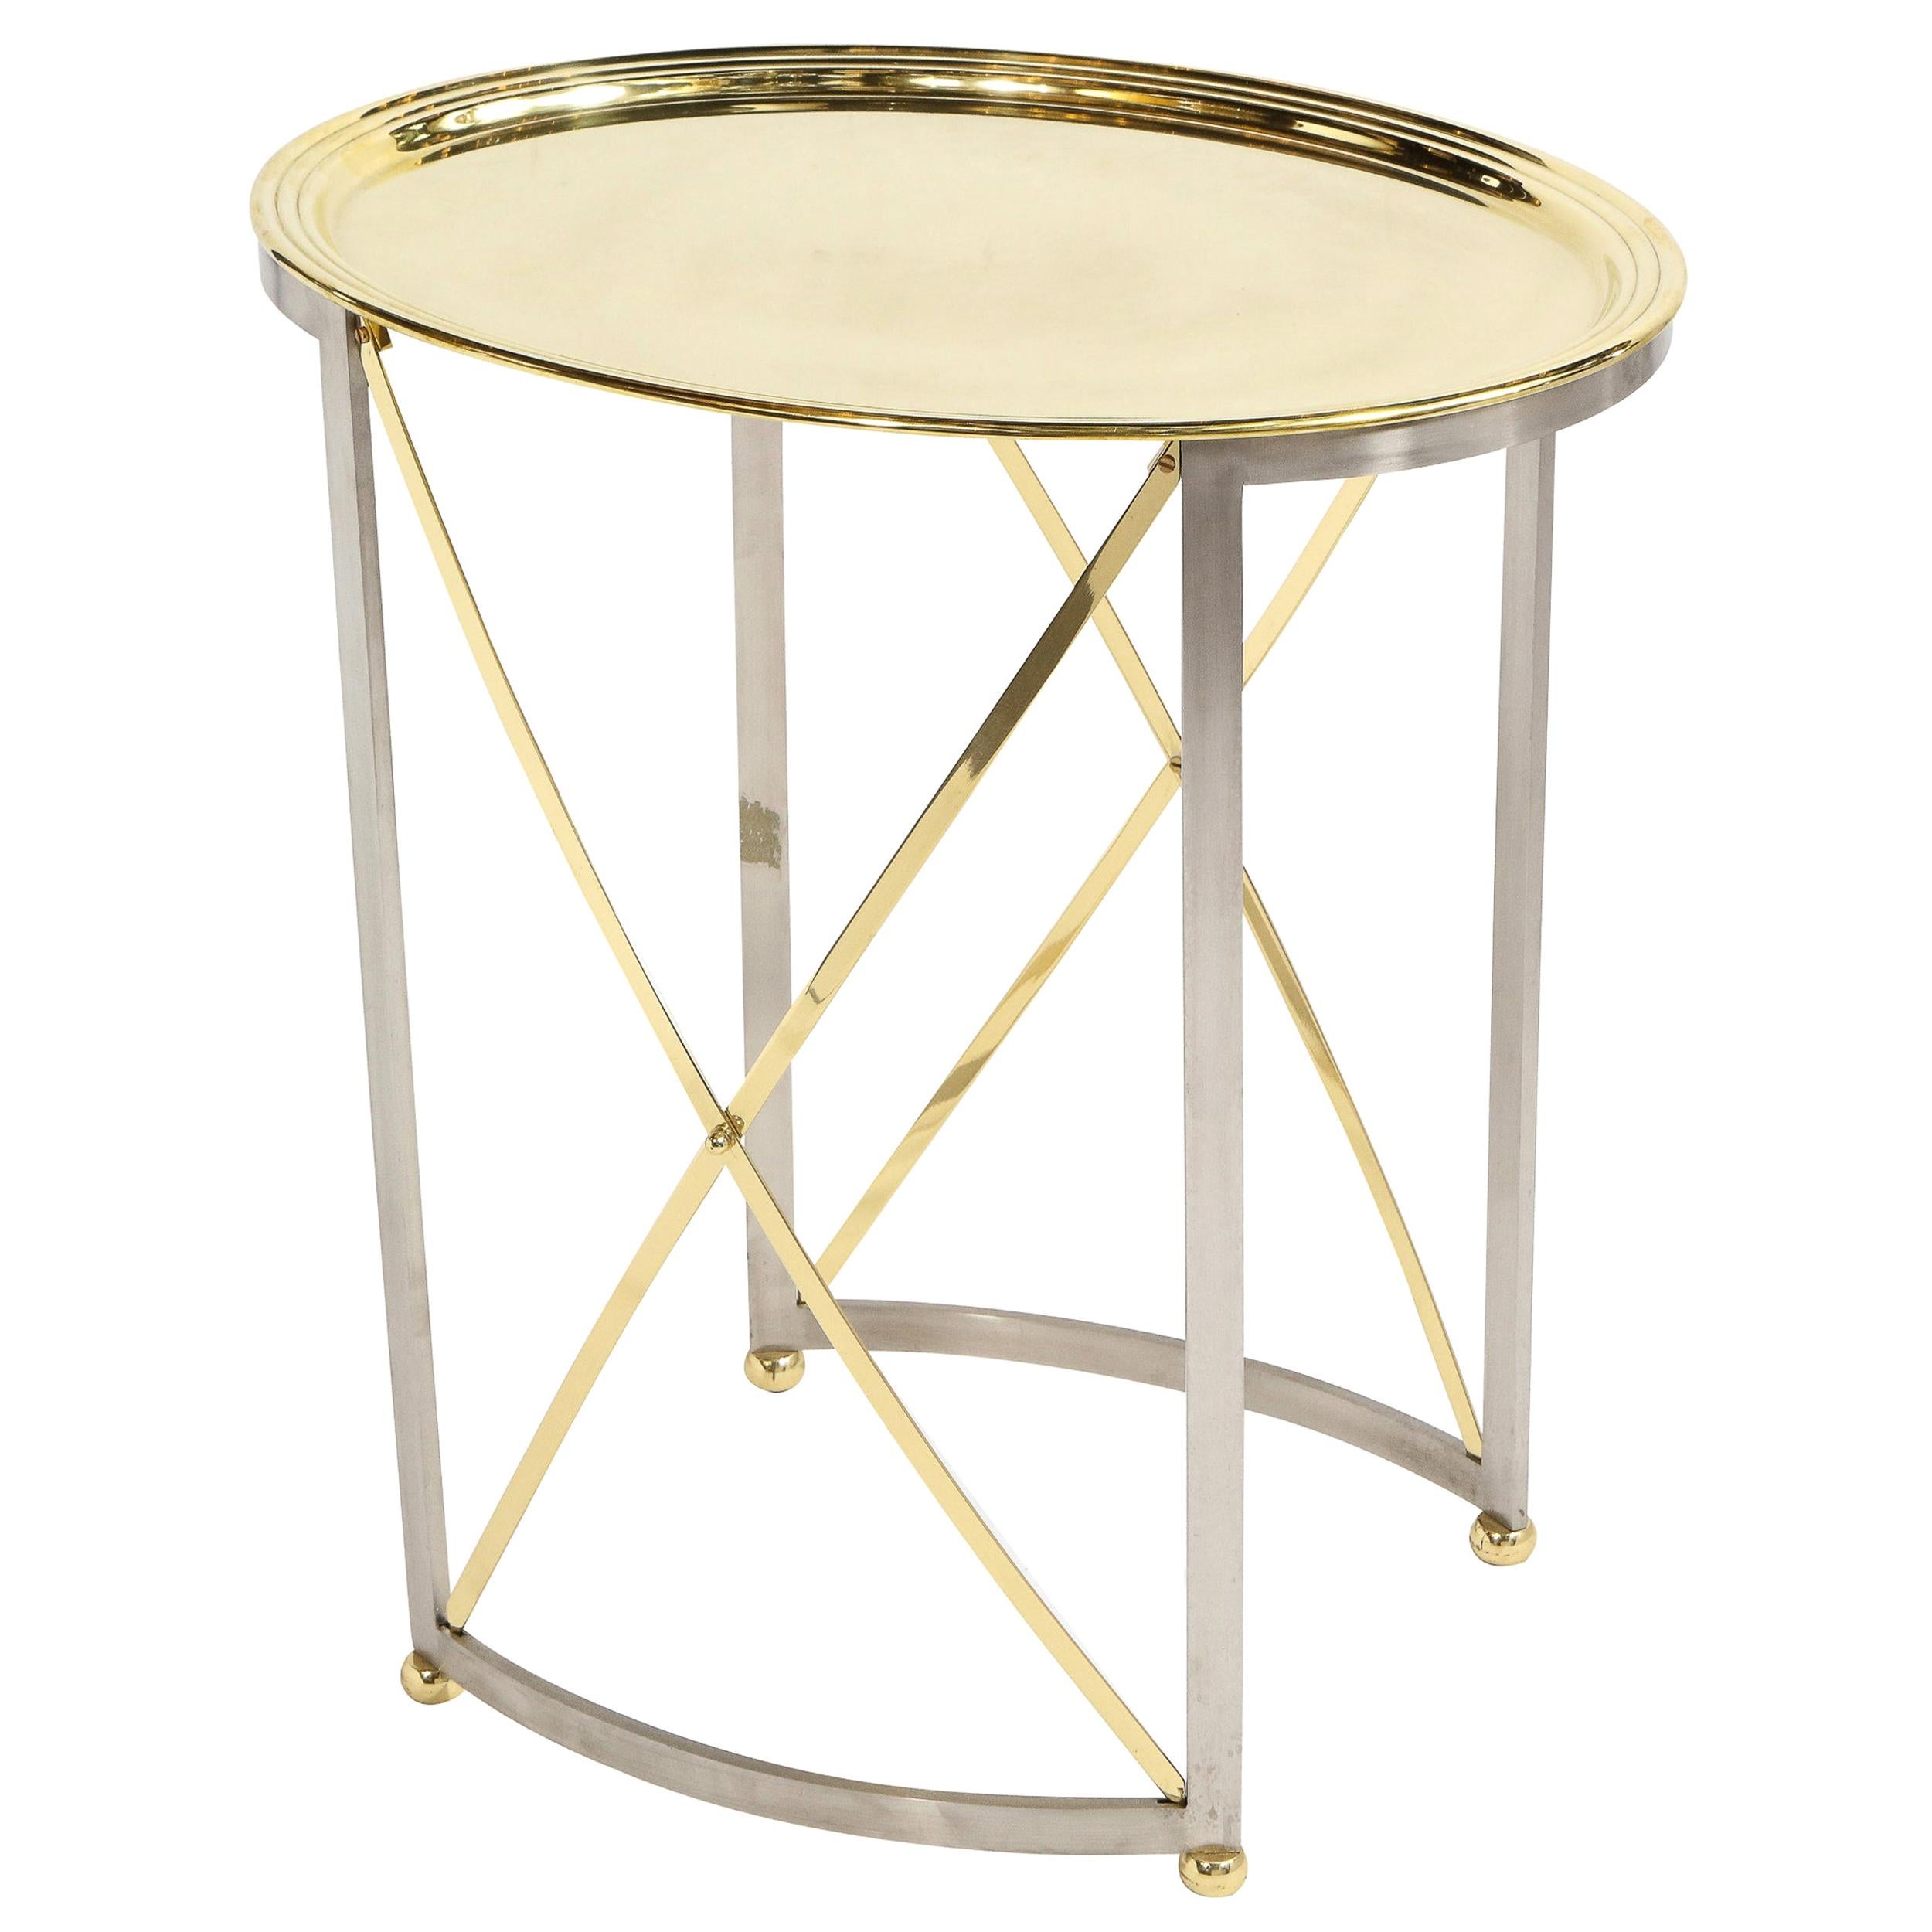 Mid-Century Brass & Nickel Side Table with Removable Tray Top by Maison Jansen